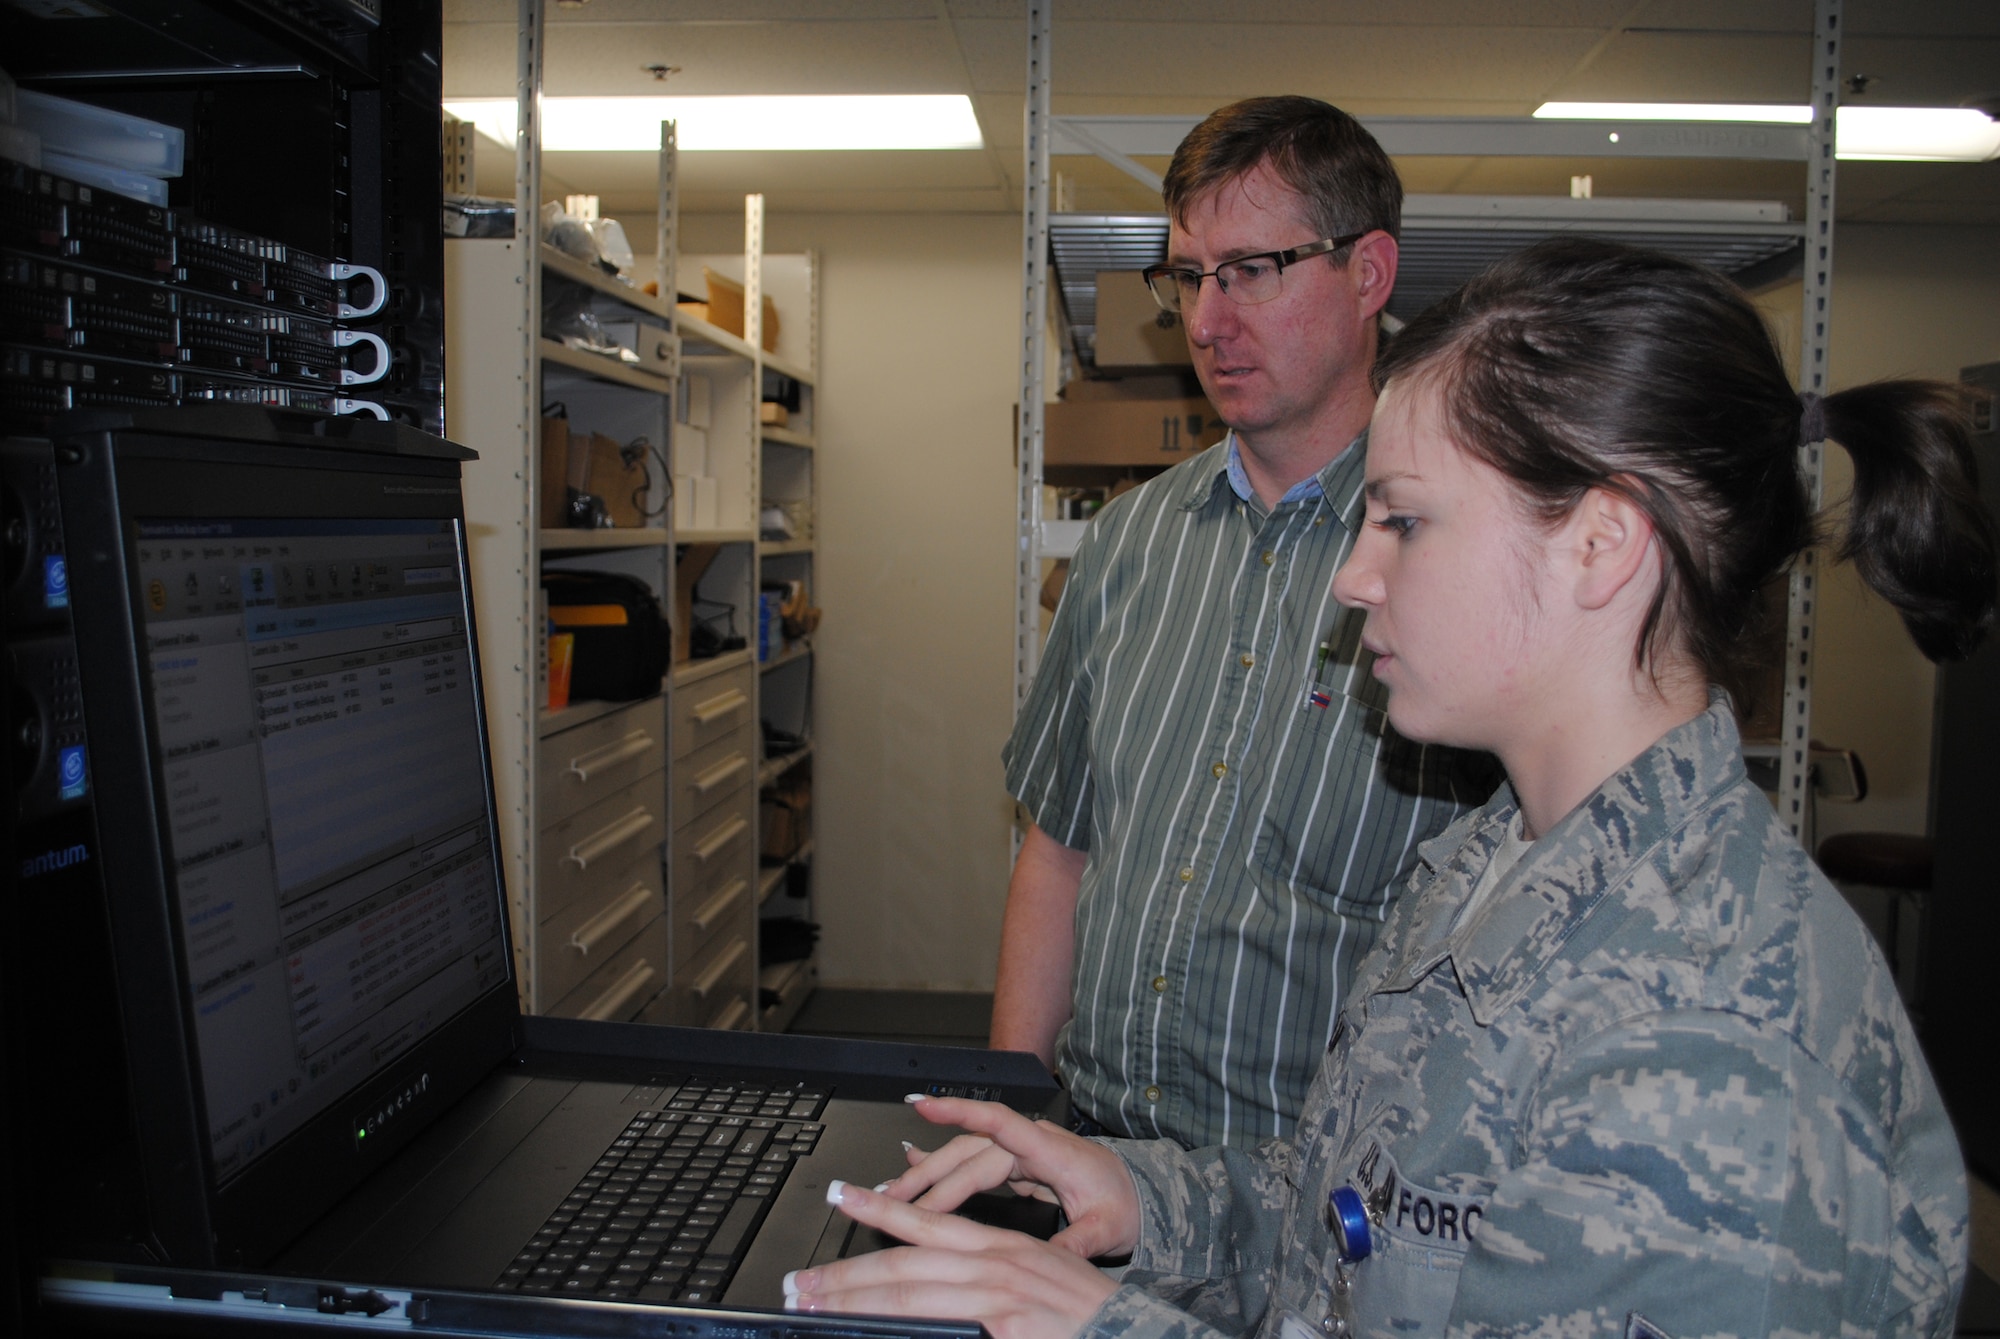 Airman 1st  Class Amy Kelm, 341st Medical Support Squadron computer assistant technician, continues some work on a computer as Kurt Lott, 341st MDSS senior technical support lead, supervises.  Airman Kelm takes on several additional duties along with her every day job requirements.  (U.S. Air Force photo/Airman Cortney Hansen)